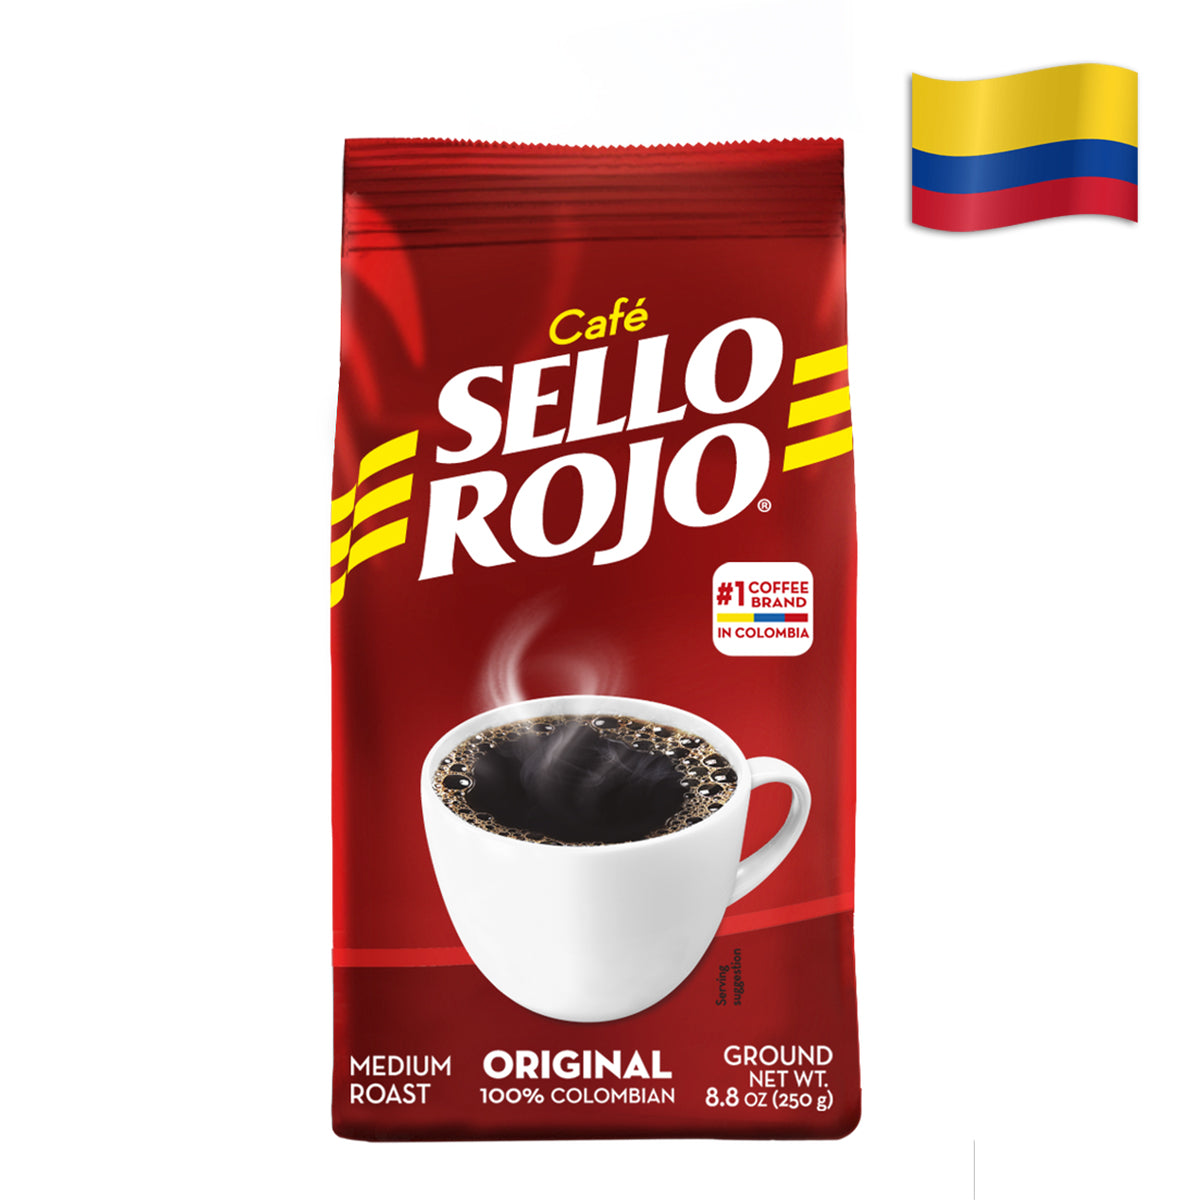 COLOMBIAN ORGANIC SELLO ROJO COFFEE GROUND Pack of 8.8 Oz